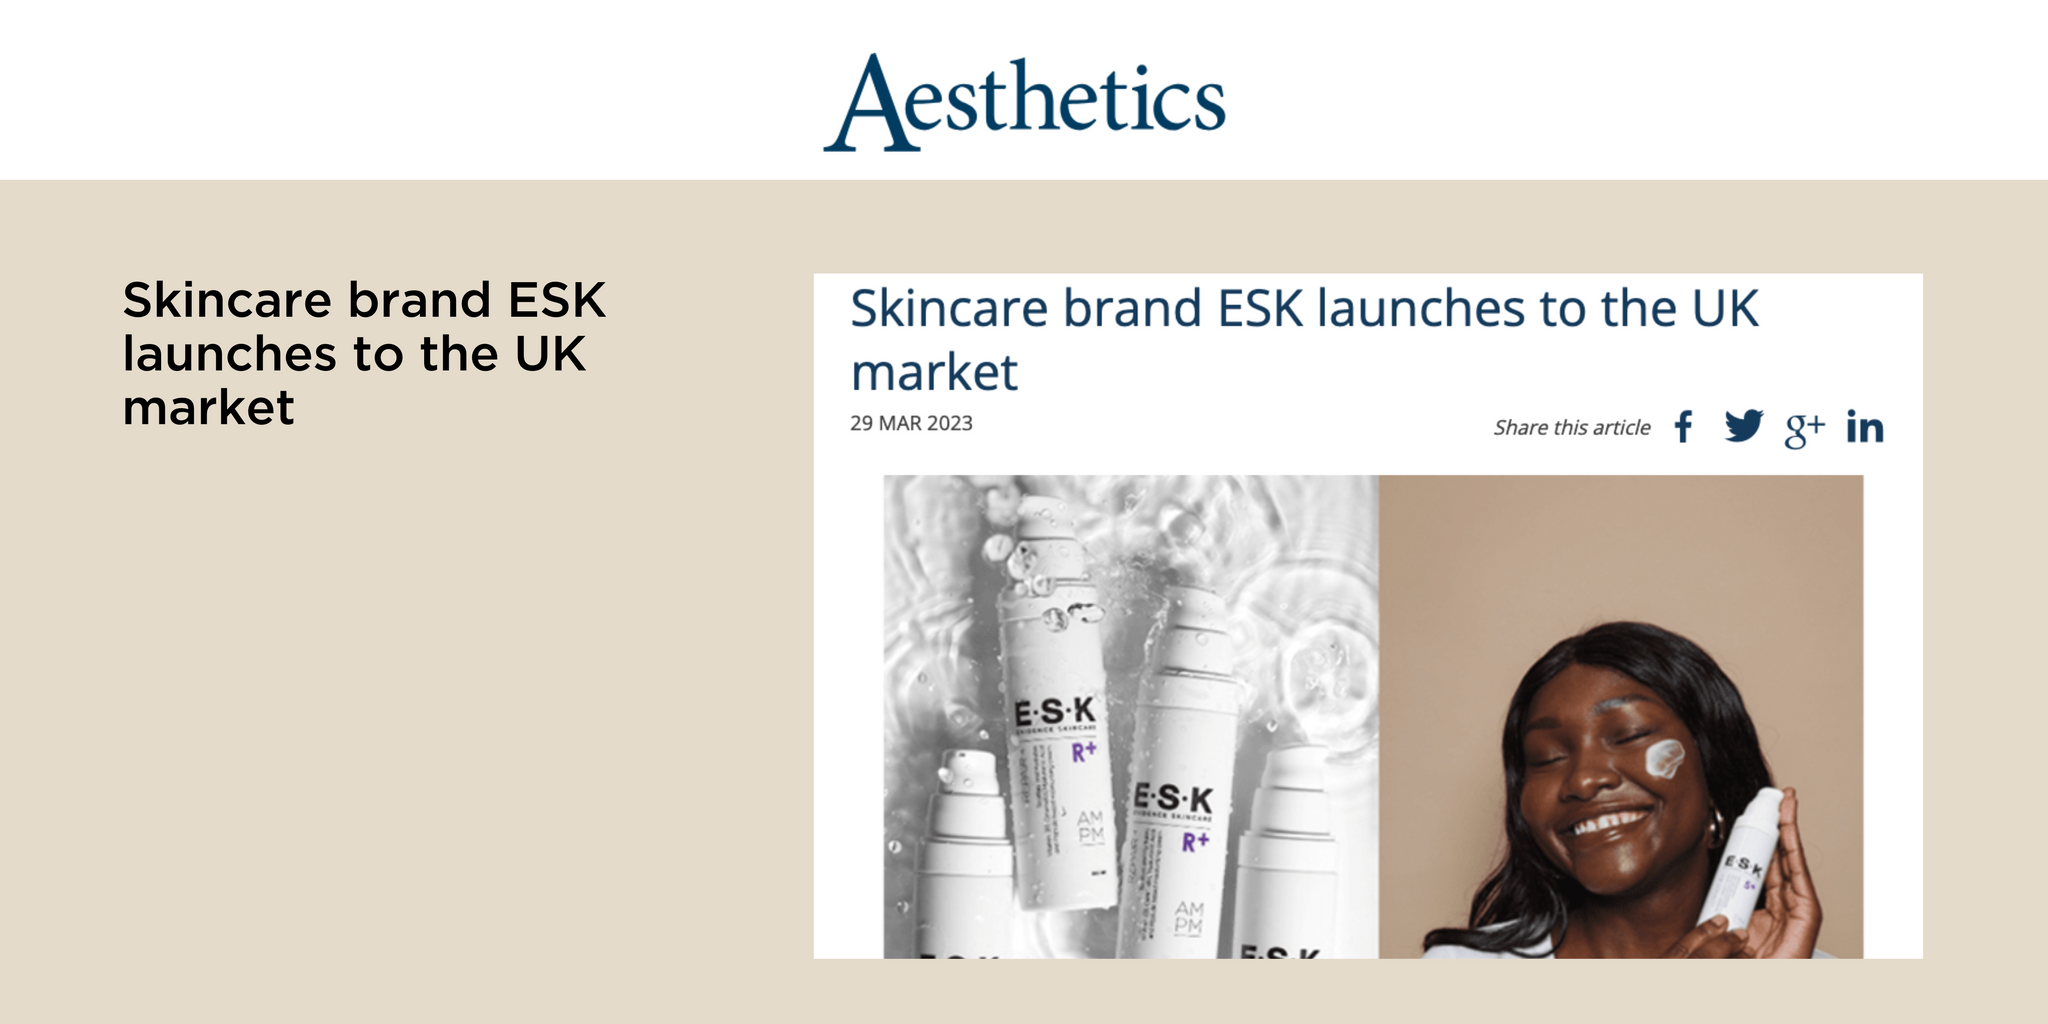 Skincare brand ESK launches to the UK market